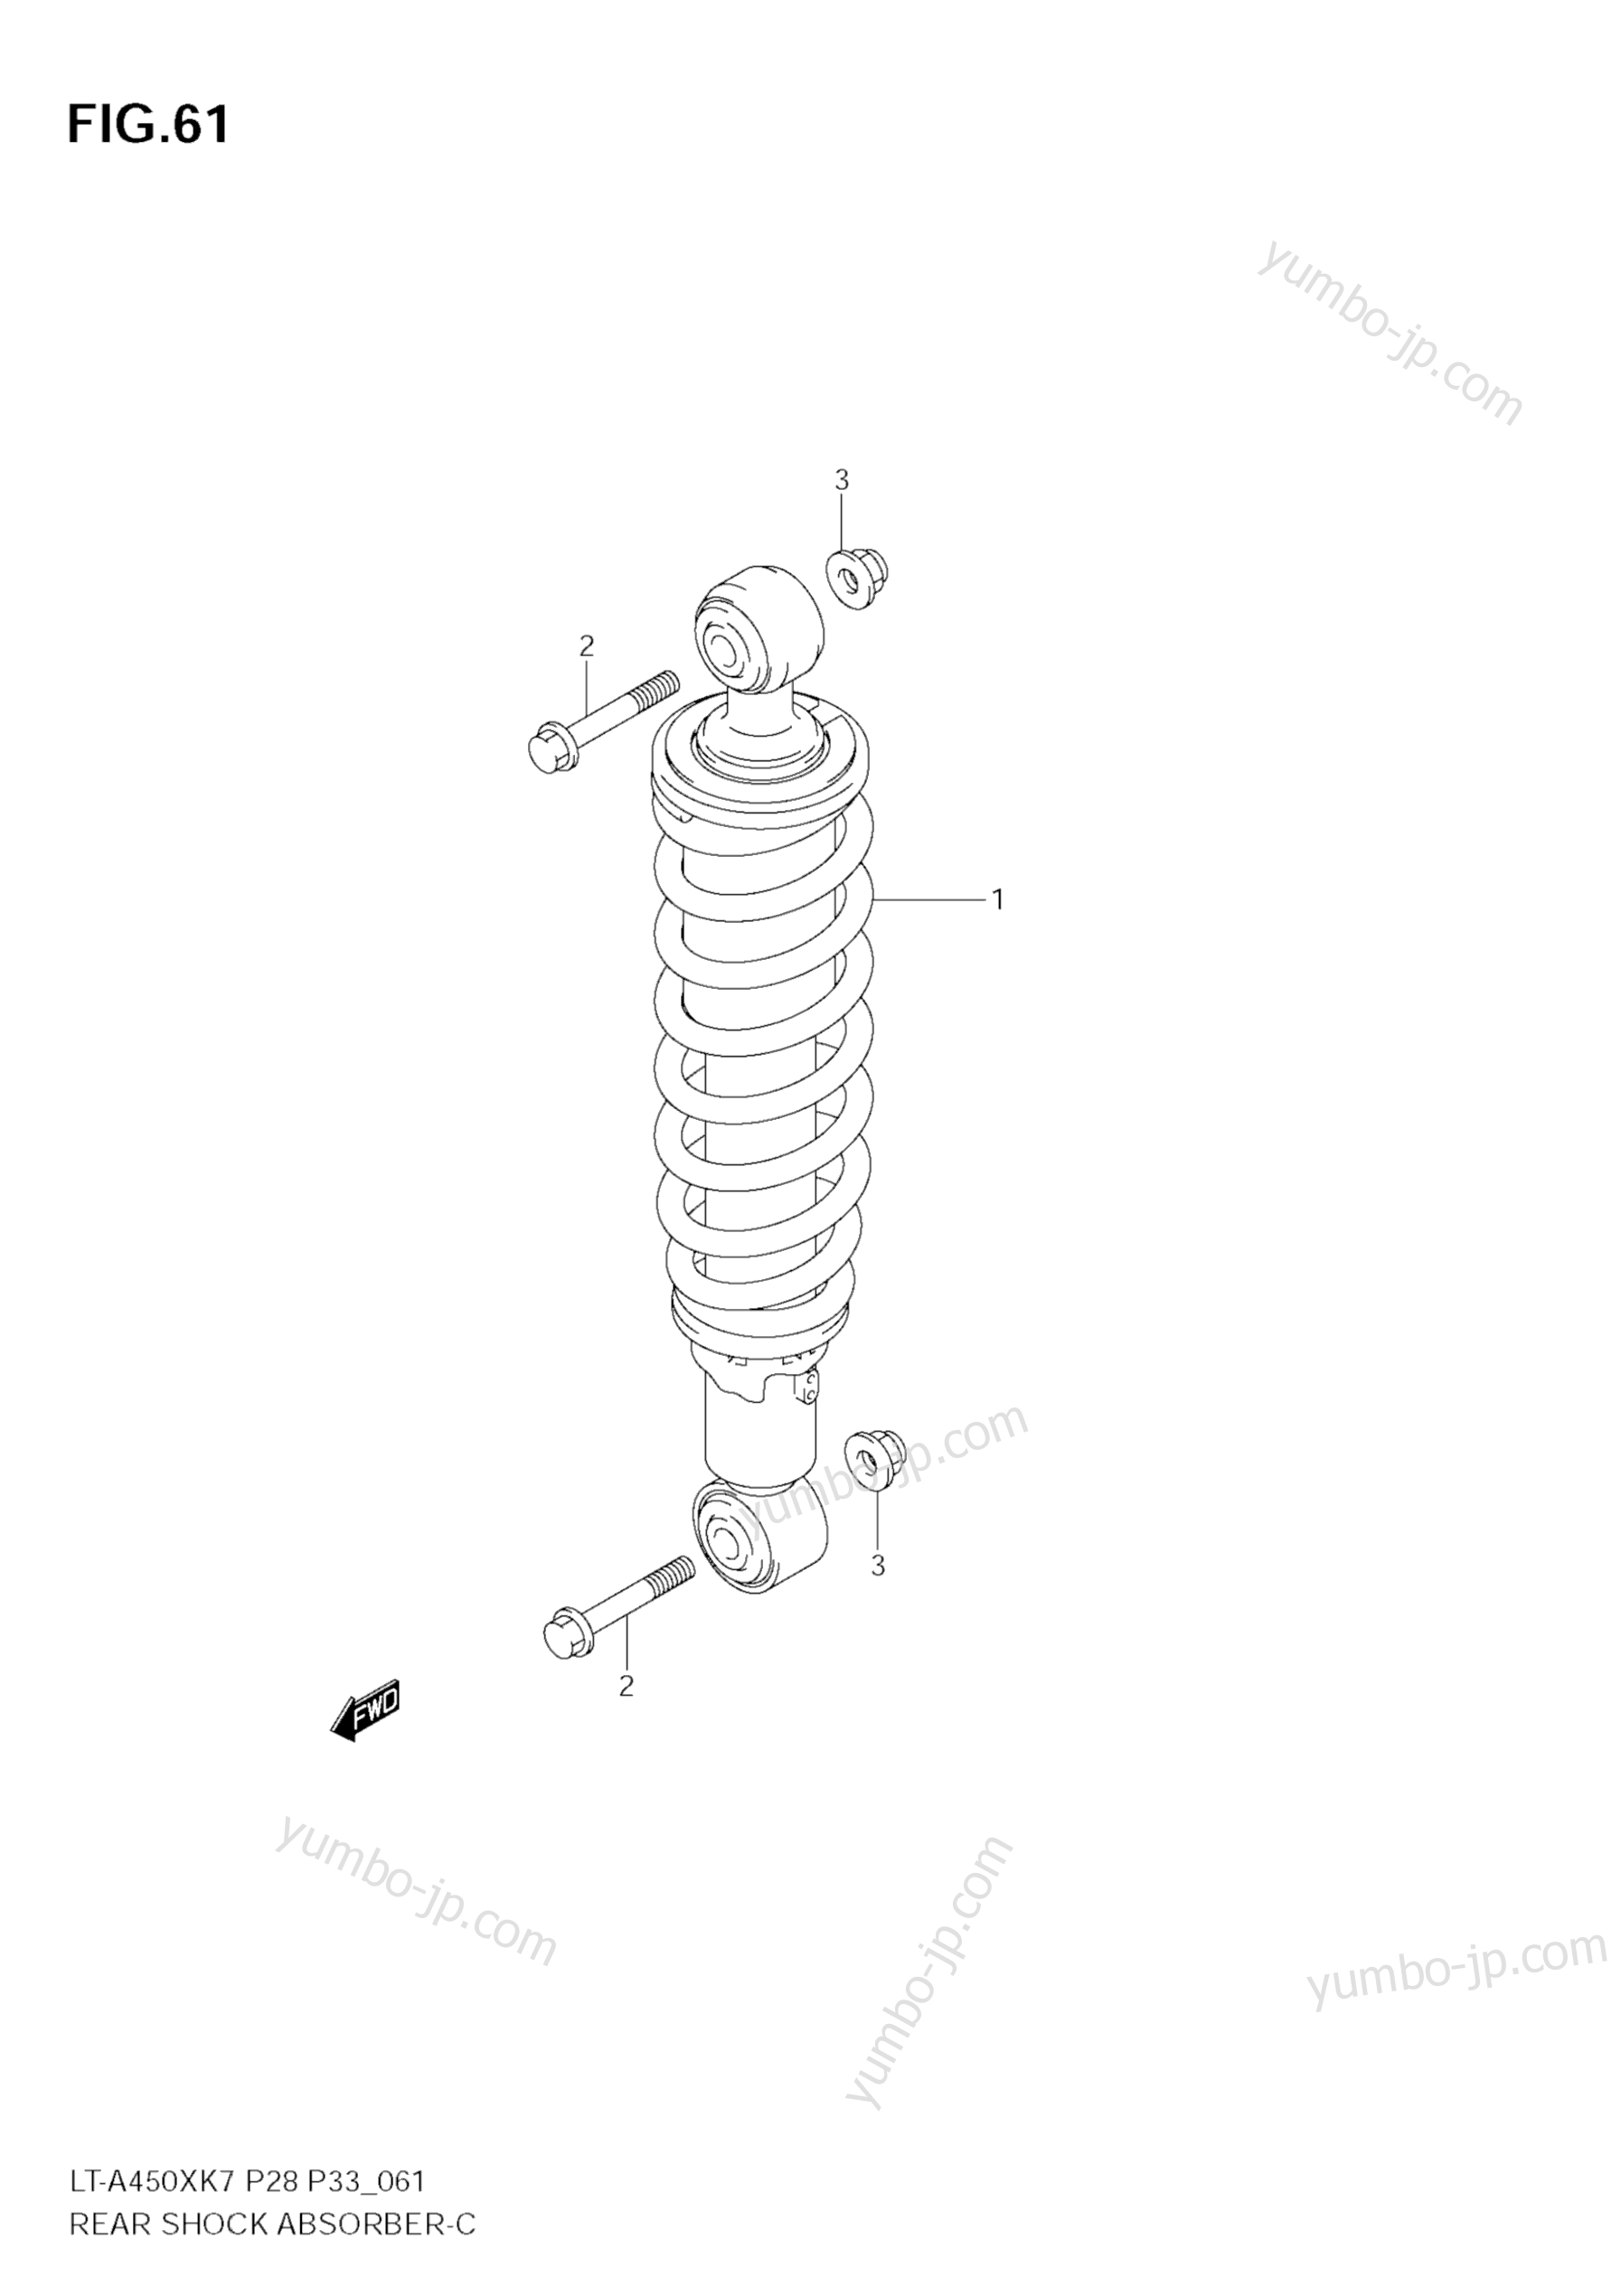 REAR SHOCK ABSORBER for ATVs SUZUKI KingQuad (LT-A450XZ) 2009 year